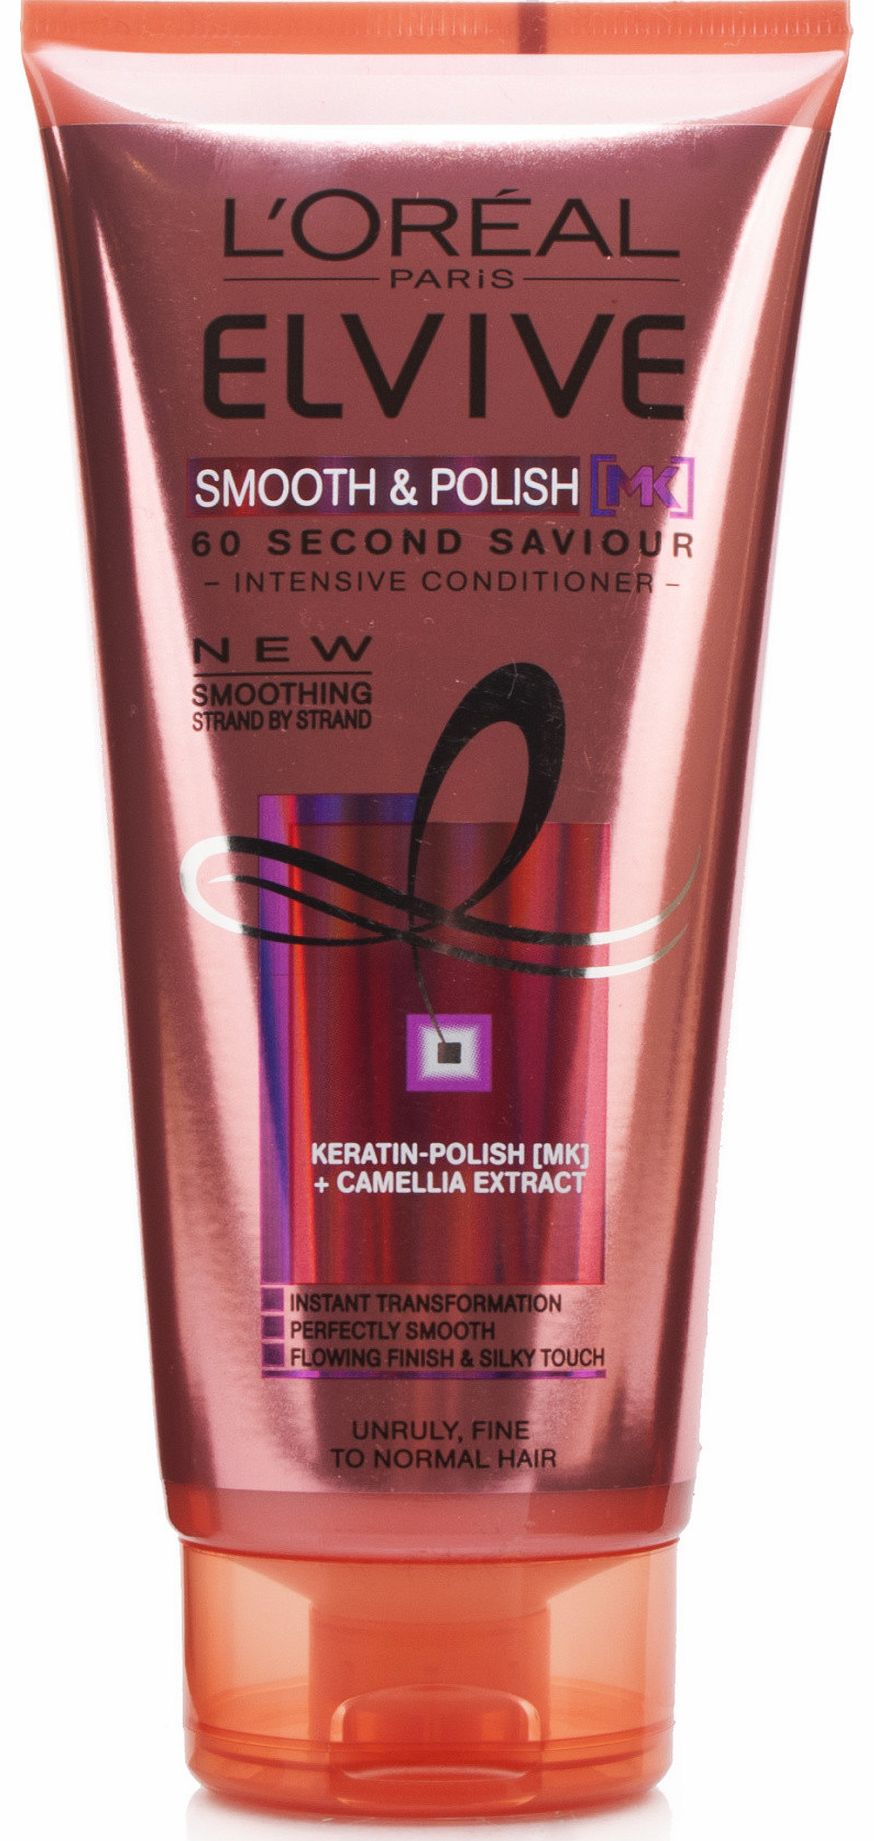 L'Oreal Elvive Smooth & Polish 60 Second